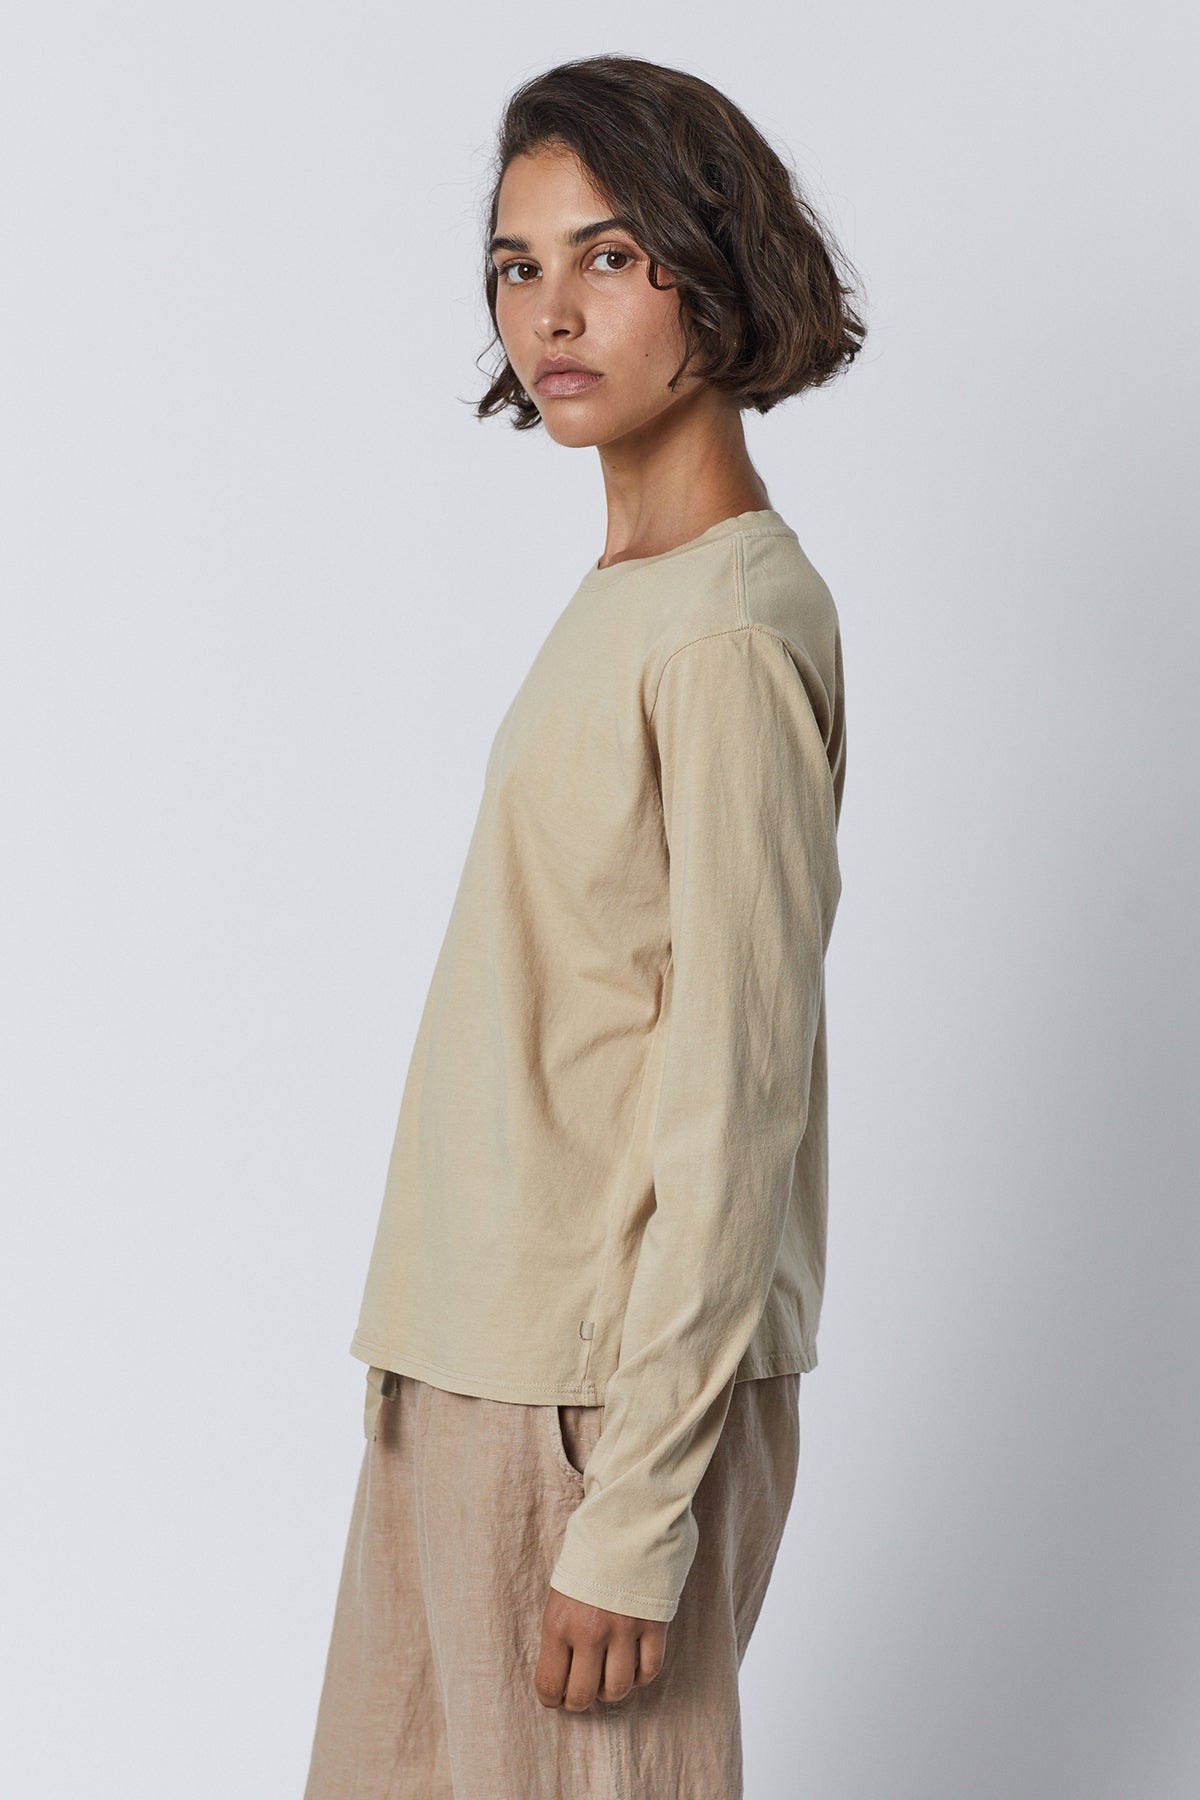 Vicente Tee in khaki side-26007100981441